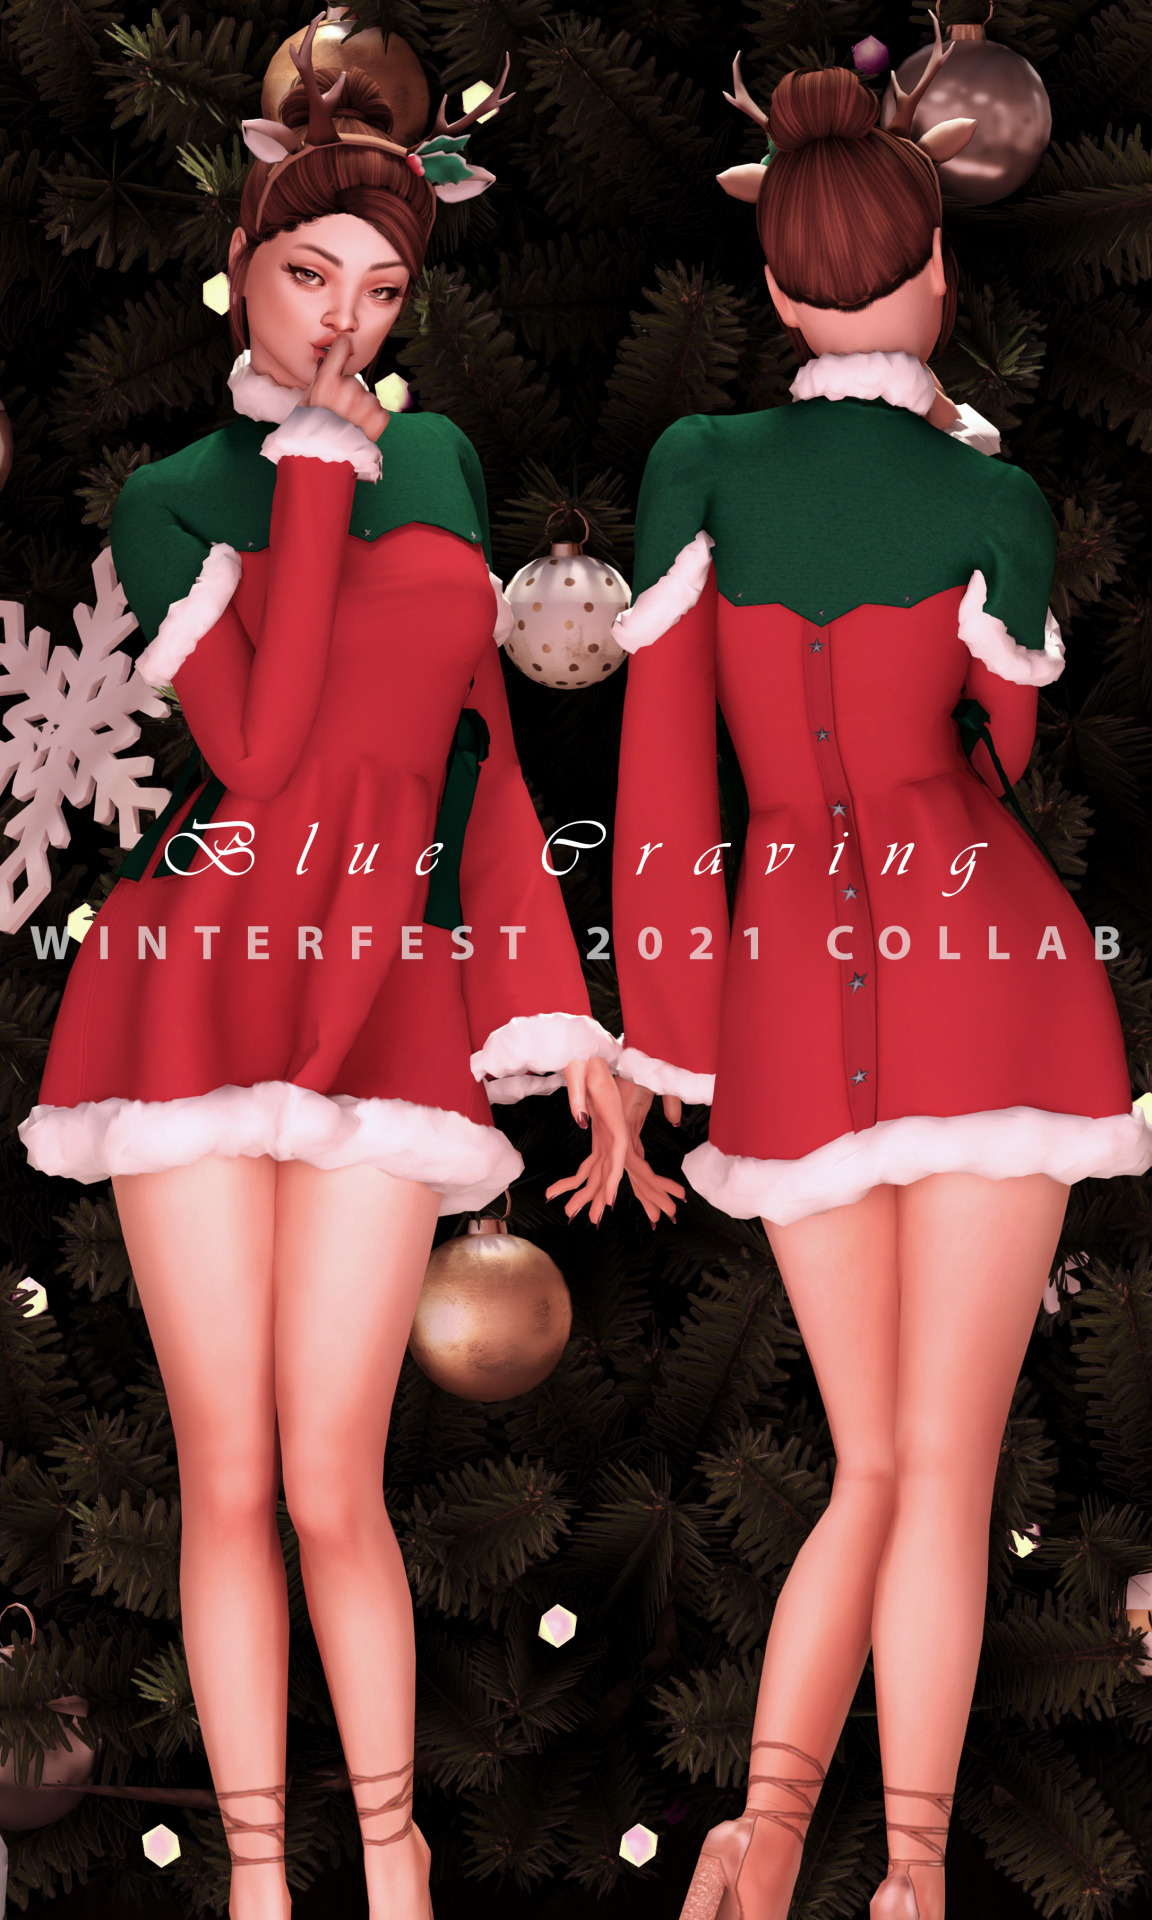 bluecravingcc:
“WINTERFEST COLLAB - BLUE CRAVING x MISSME x SMSIMS🎄🎁@missmecustomized​ , @ts4eve​ and myself are proud to offer some coordinated gifts for Winterfest! This was such a pleasure to work with those two Fantastic and lovely creators, i...